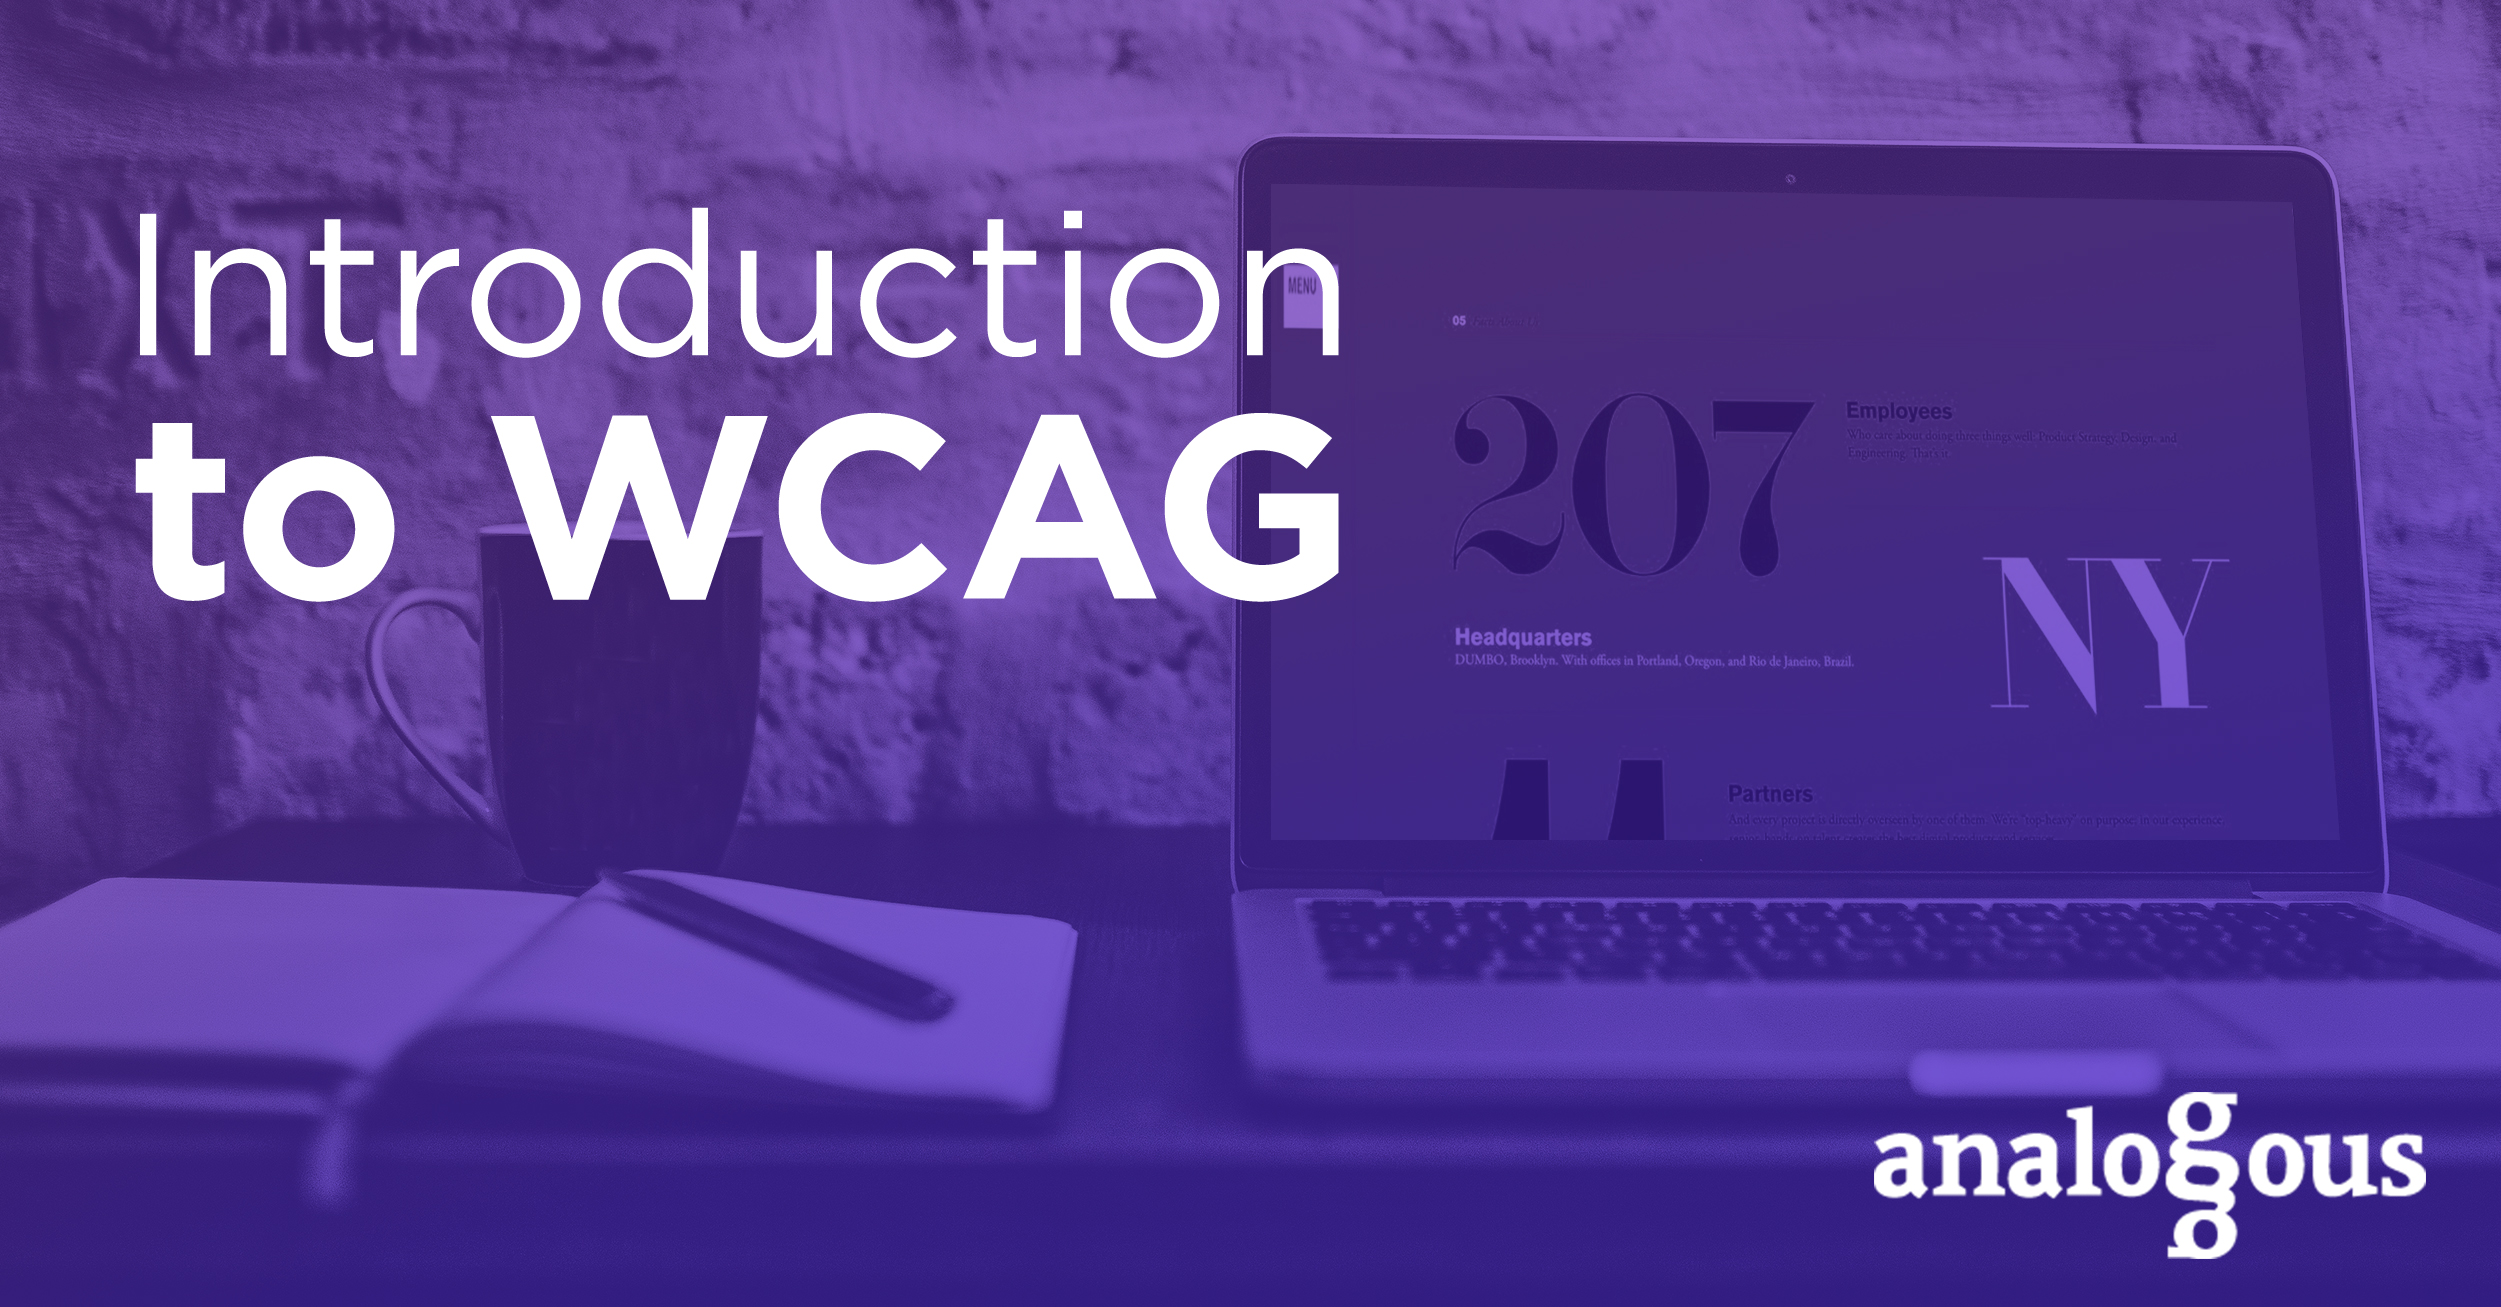 Introduction to WCAG